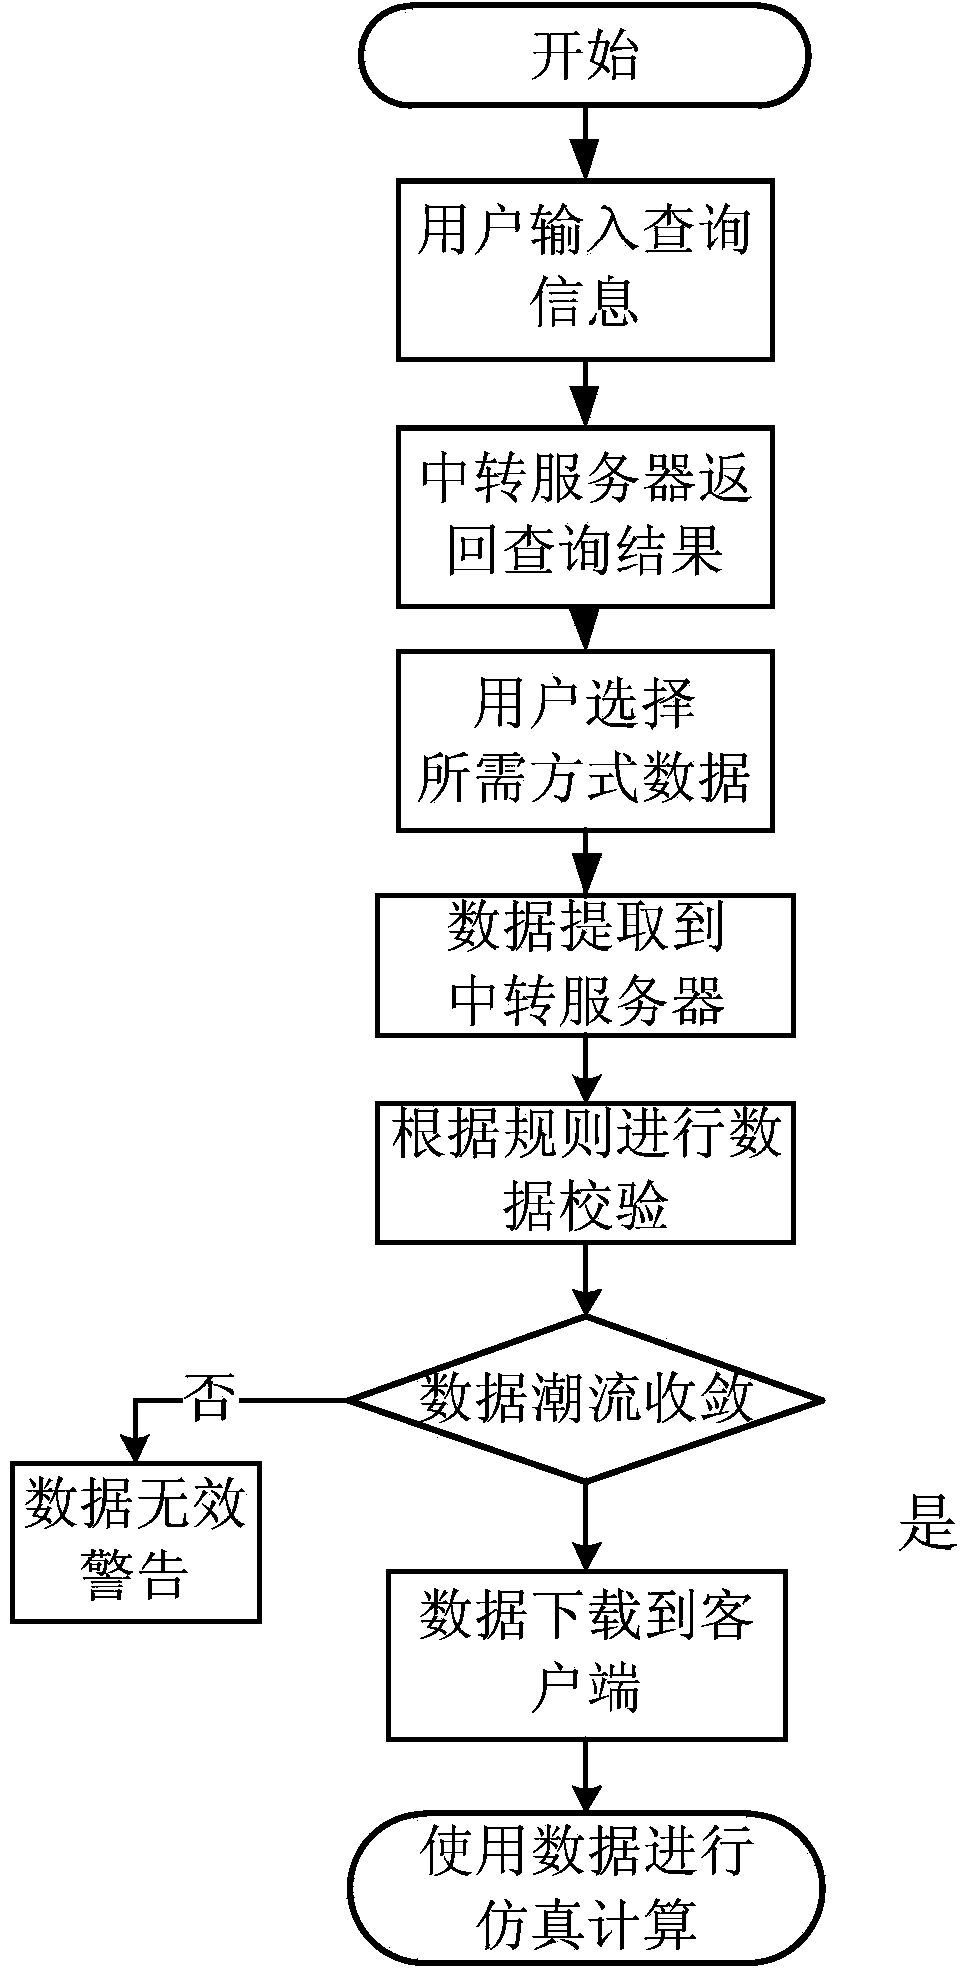 Power grid operating mode data managing system based on C/S framework and achieving method for power grid operating mode data managing system